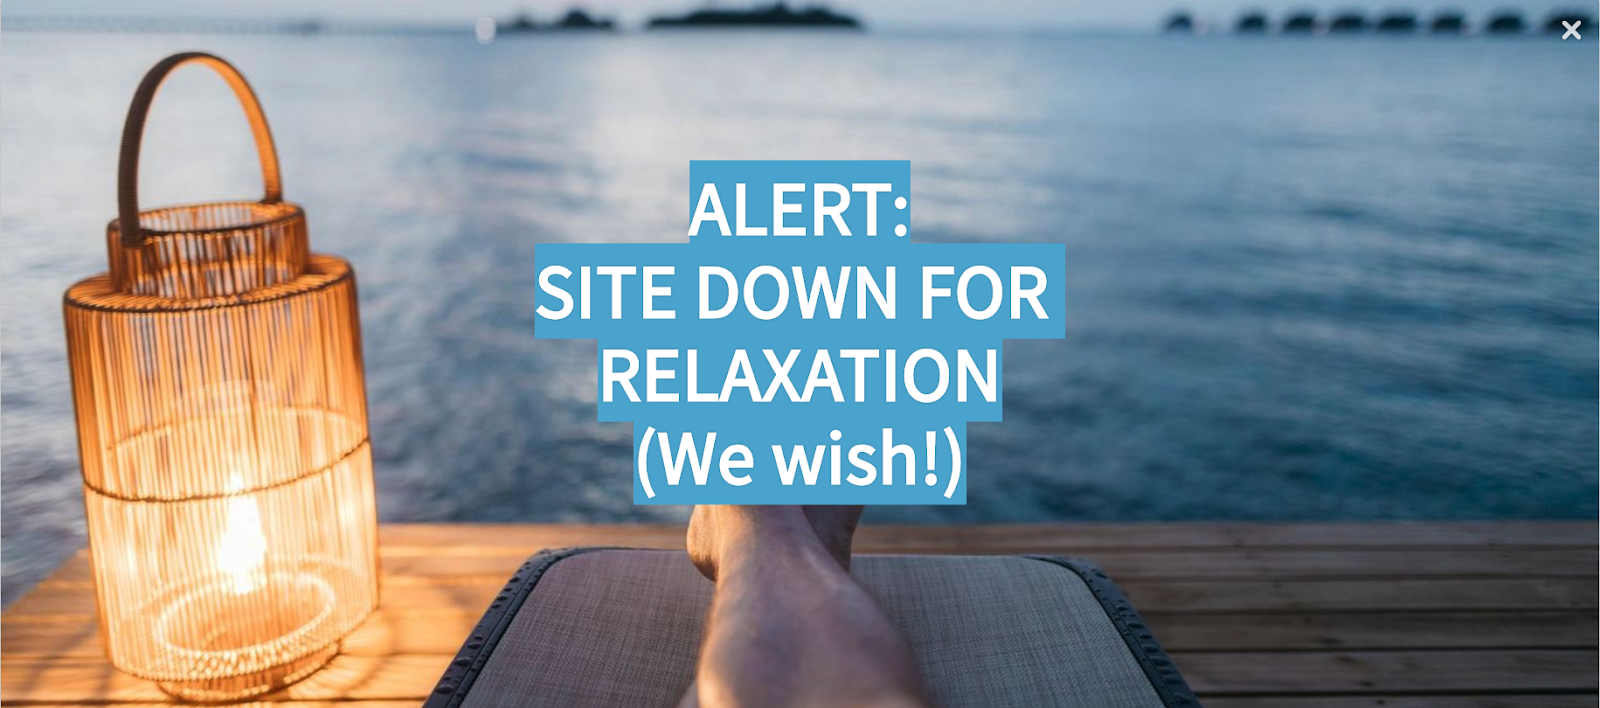 Alert: Site Down for Relaxation